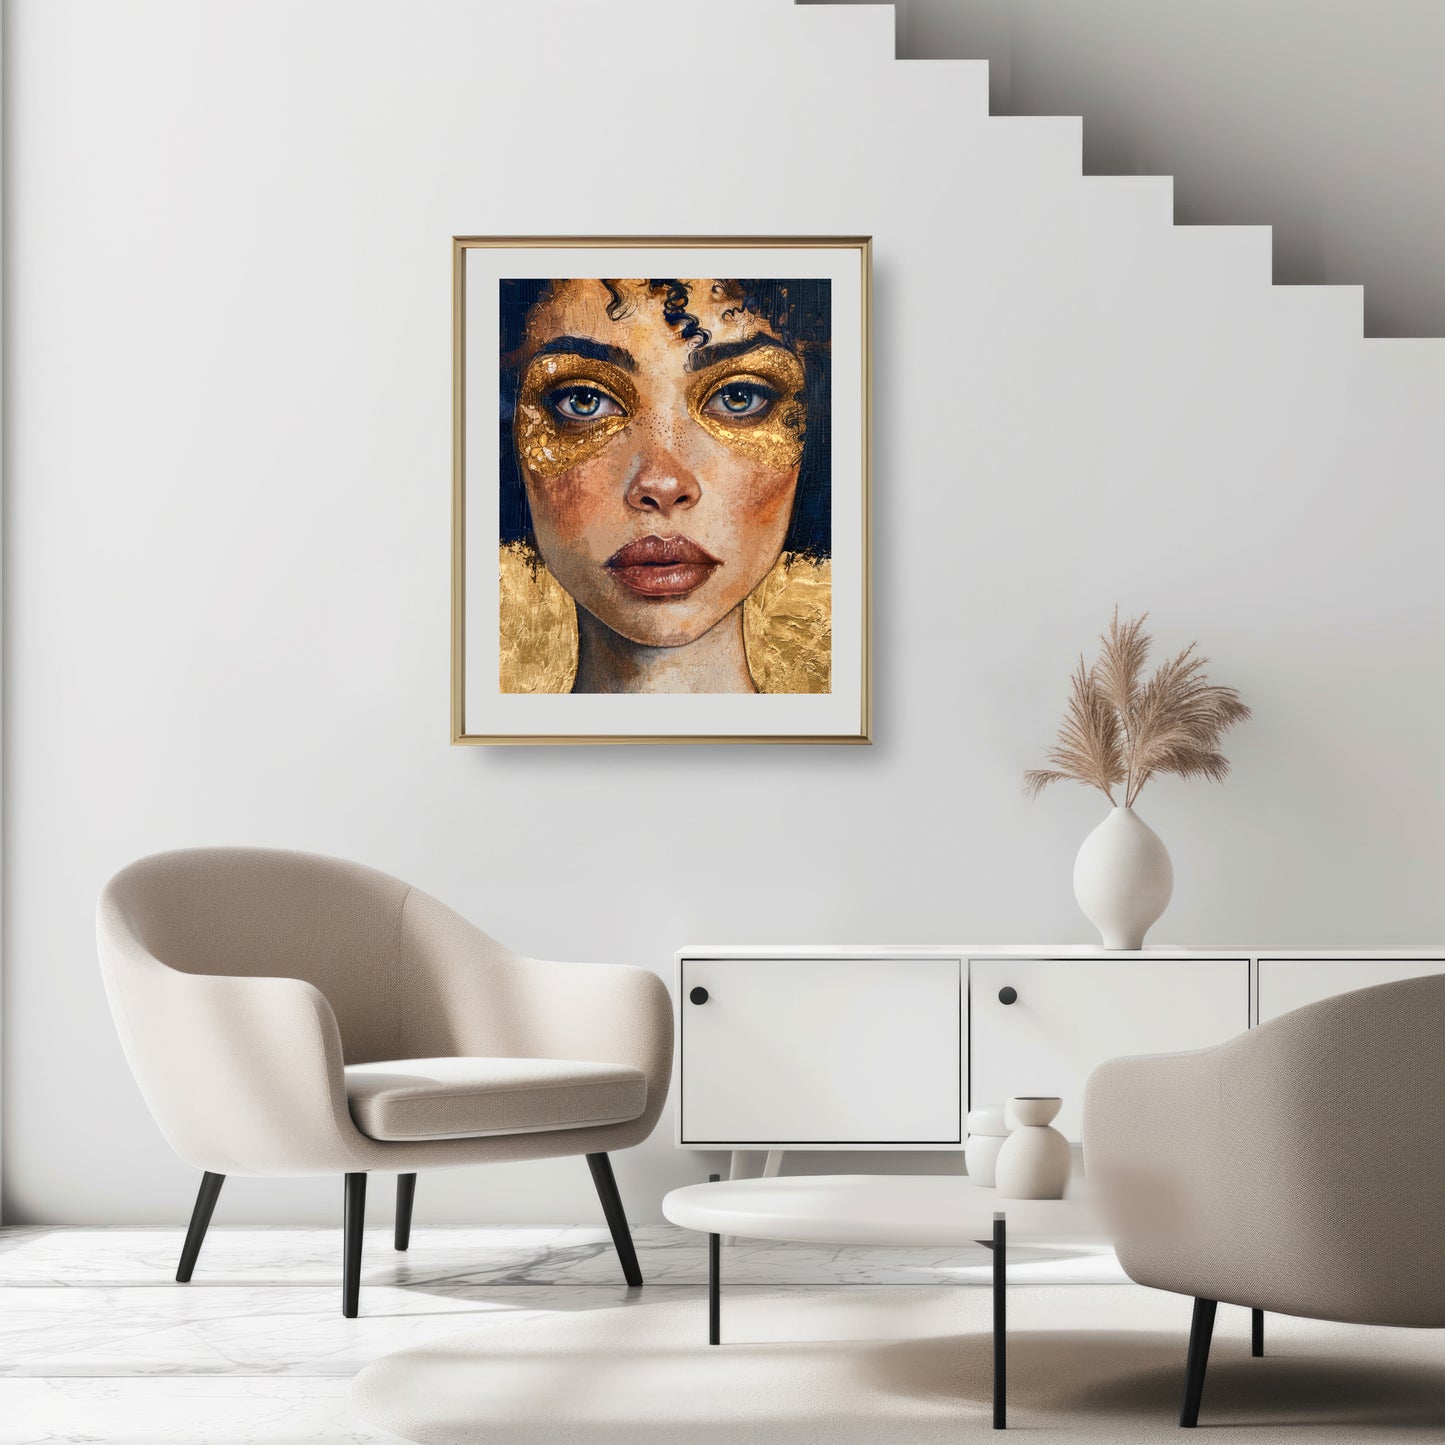 Art print of a woman with gold eye makeup from the Heart Of Gold collection, perfect for any fine art prints collection.